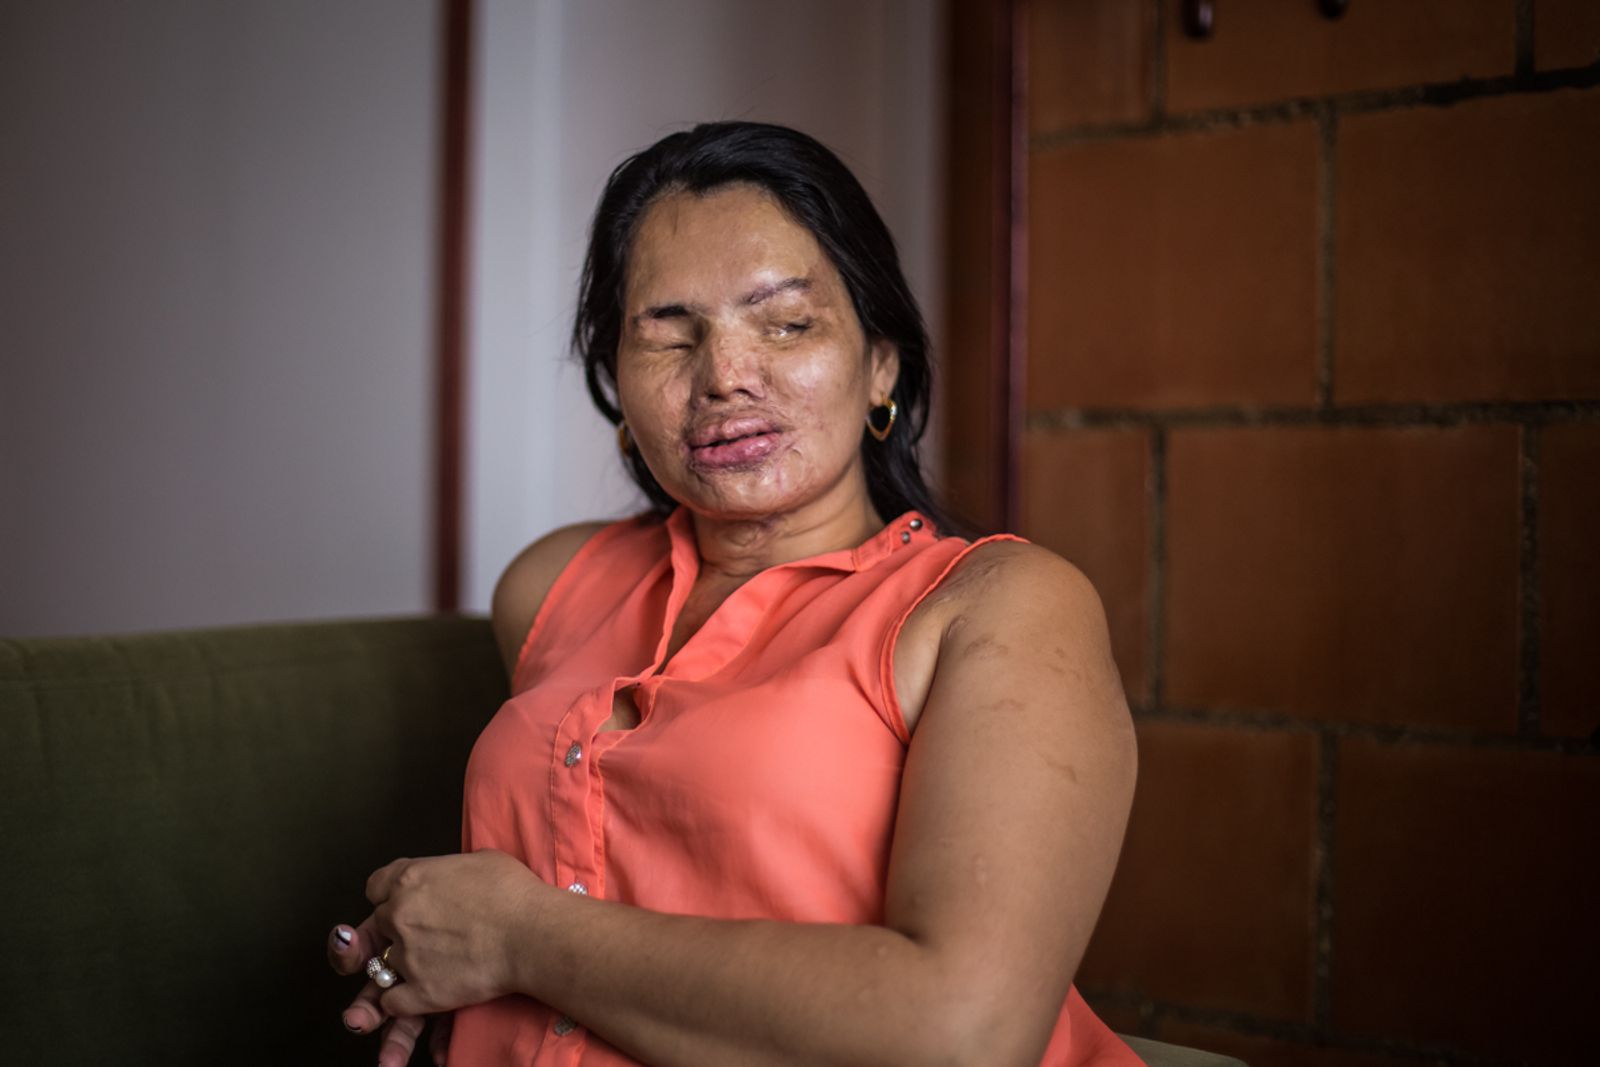 © Betty Laura Zapata - Image from the Facing Up: Acid Attacks in Colombia  photography project